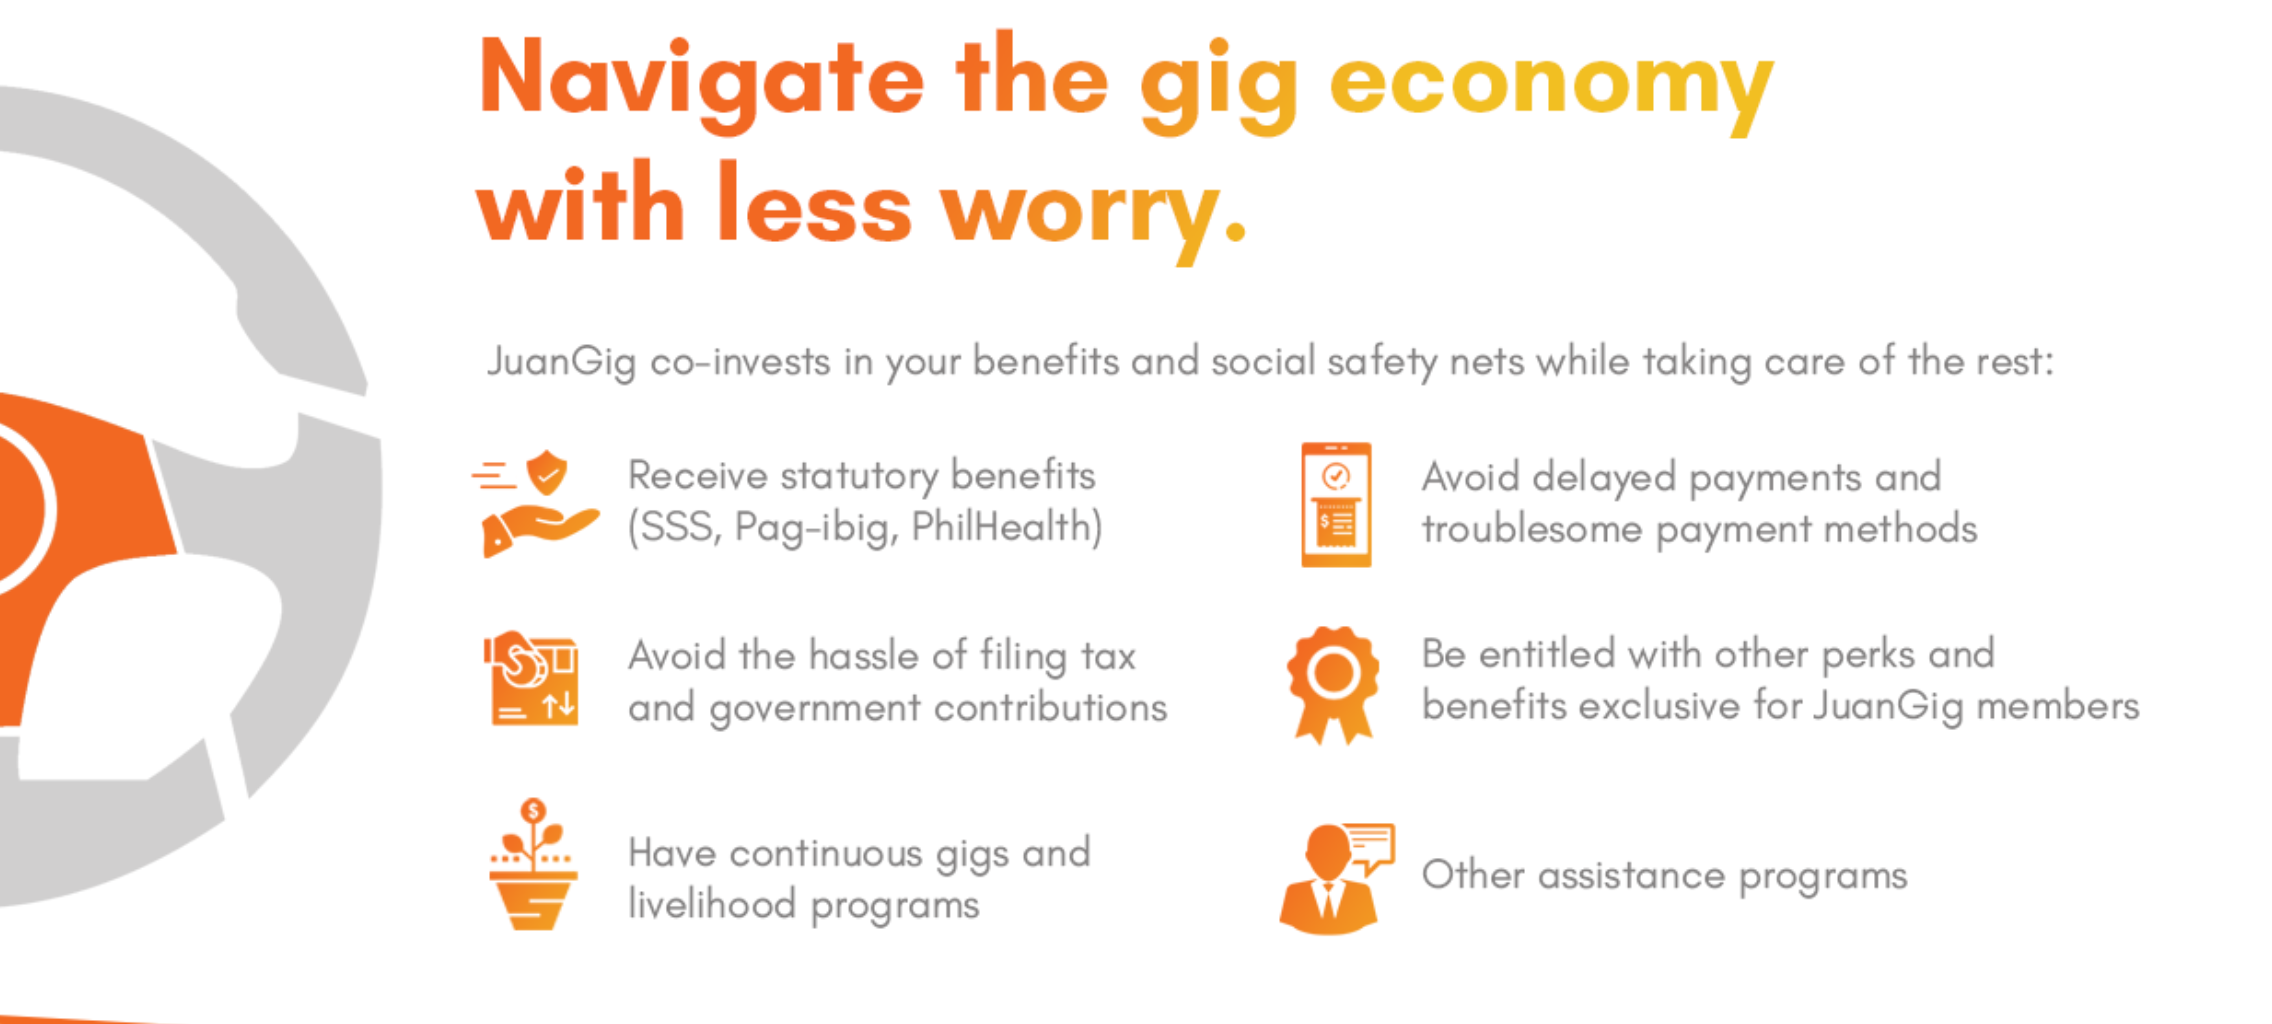 Navigate the gig economy with less  worry. Juangig co-invest in your benefits and social safety nets while taking care of the rest: Received statutory benefits(SSS,Pag-ibig, Philhealth), Avoid the hassle of filing tax and goverment contributions, Have continuous gigs and livelihood programs, Avoid delayed payments and troublesome payment methods, Be entitled with other perks and benefits exclusive for JuaGig members, Other assistance programs.